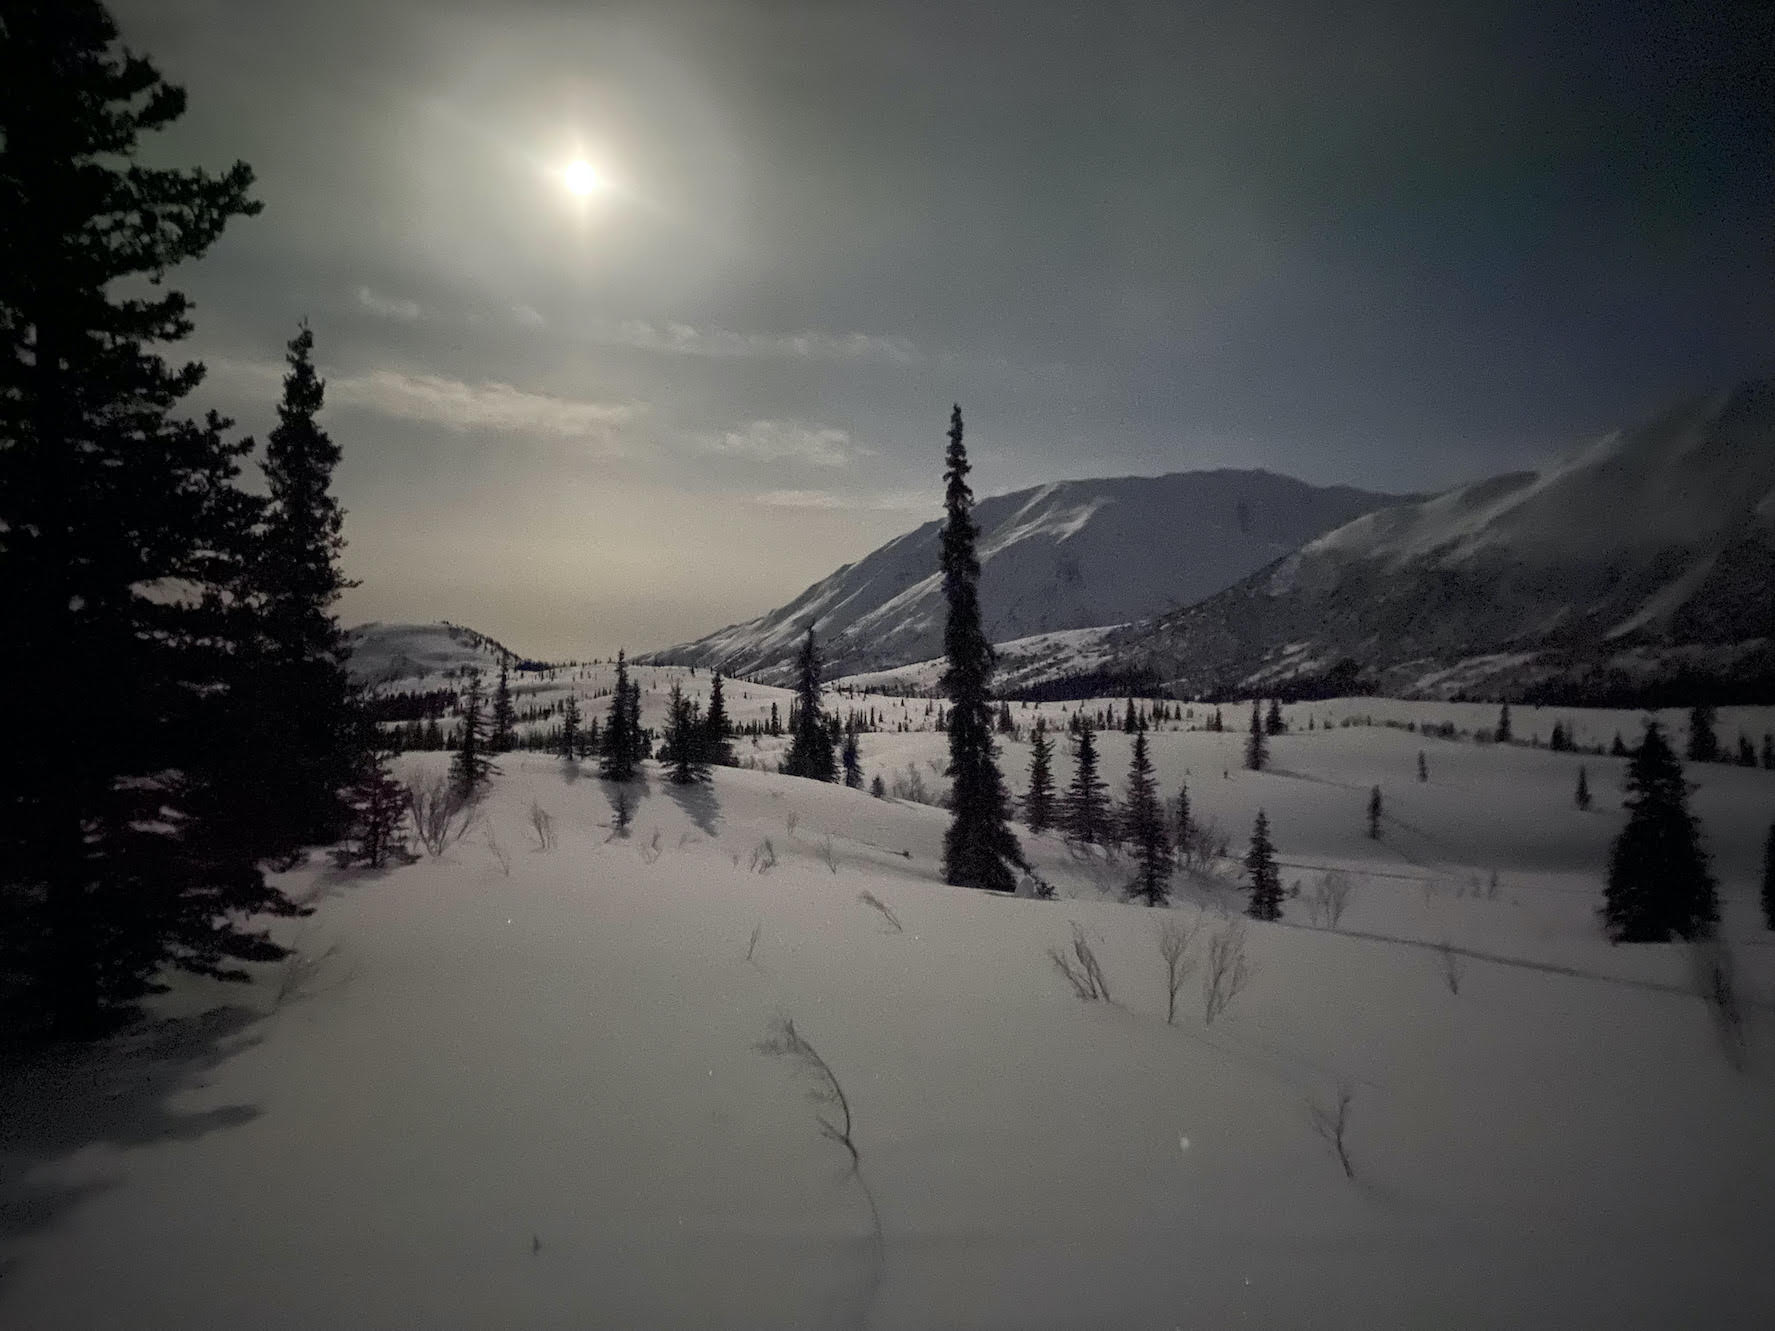 The moon shines on a snowy mountainous landscape studded by spruce trees.